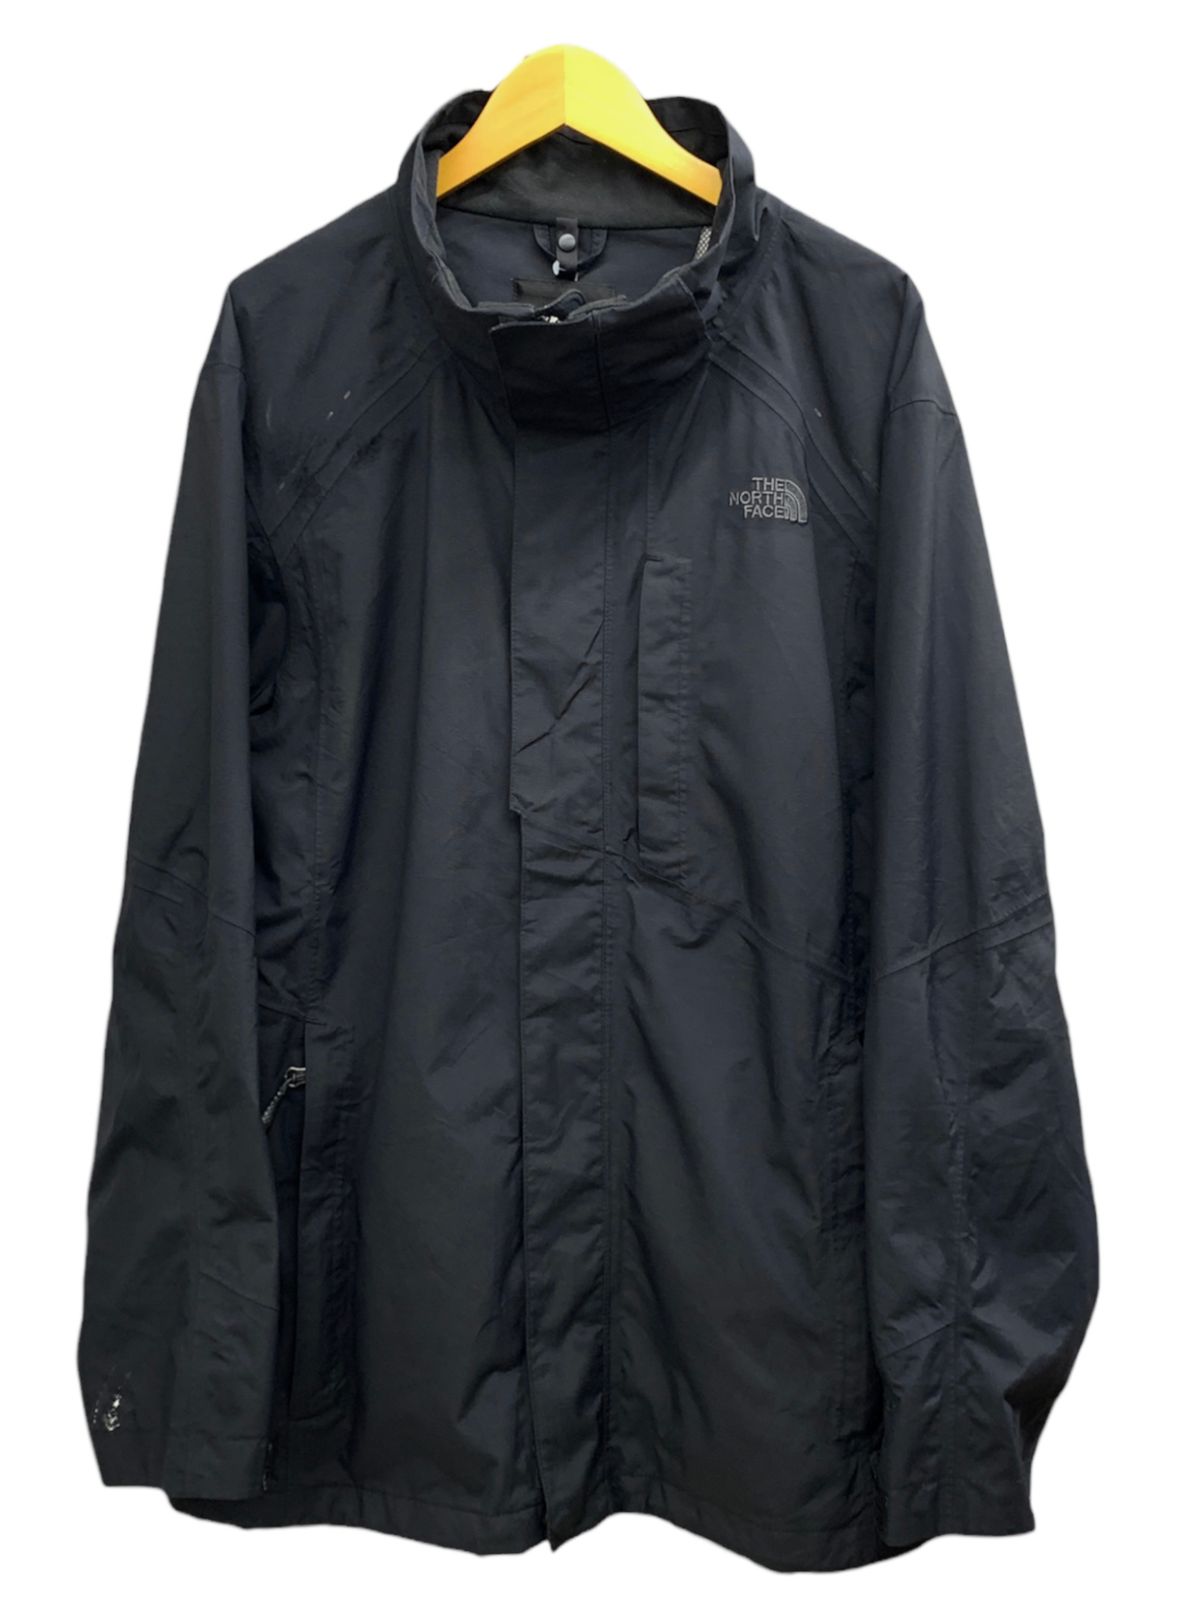 THE NORTH FACE (ザノースフェイス) Vortex Triclimate ボルテックス 